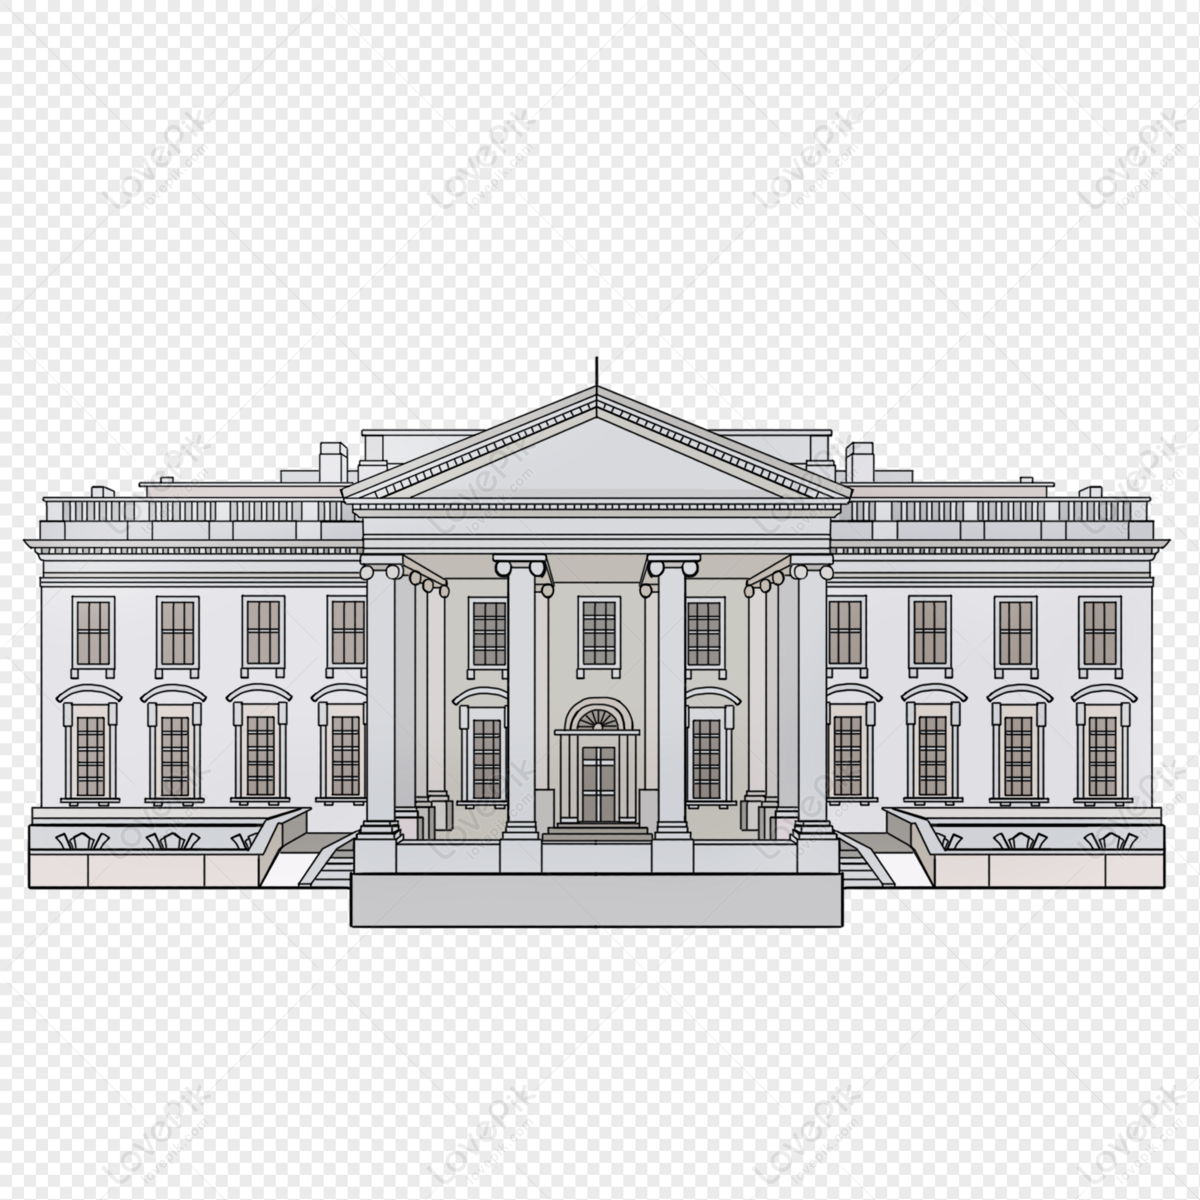 Cartoon White House Free PNG And Clipart Image For Free Download - Lovepik  | 401571769